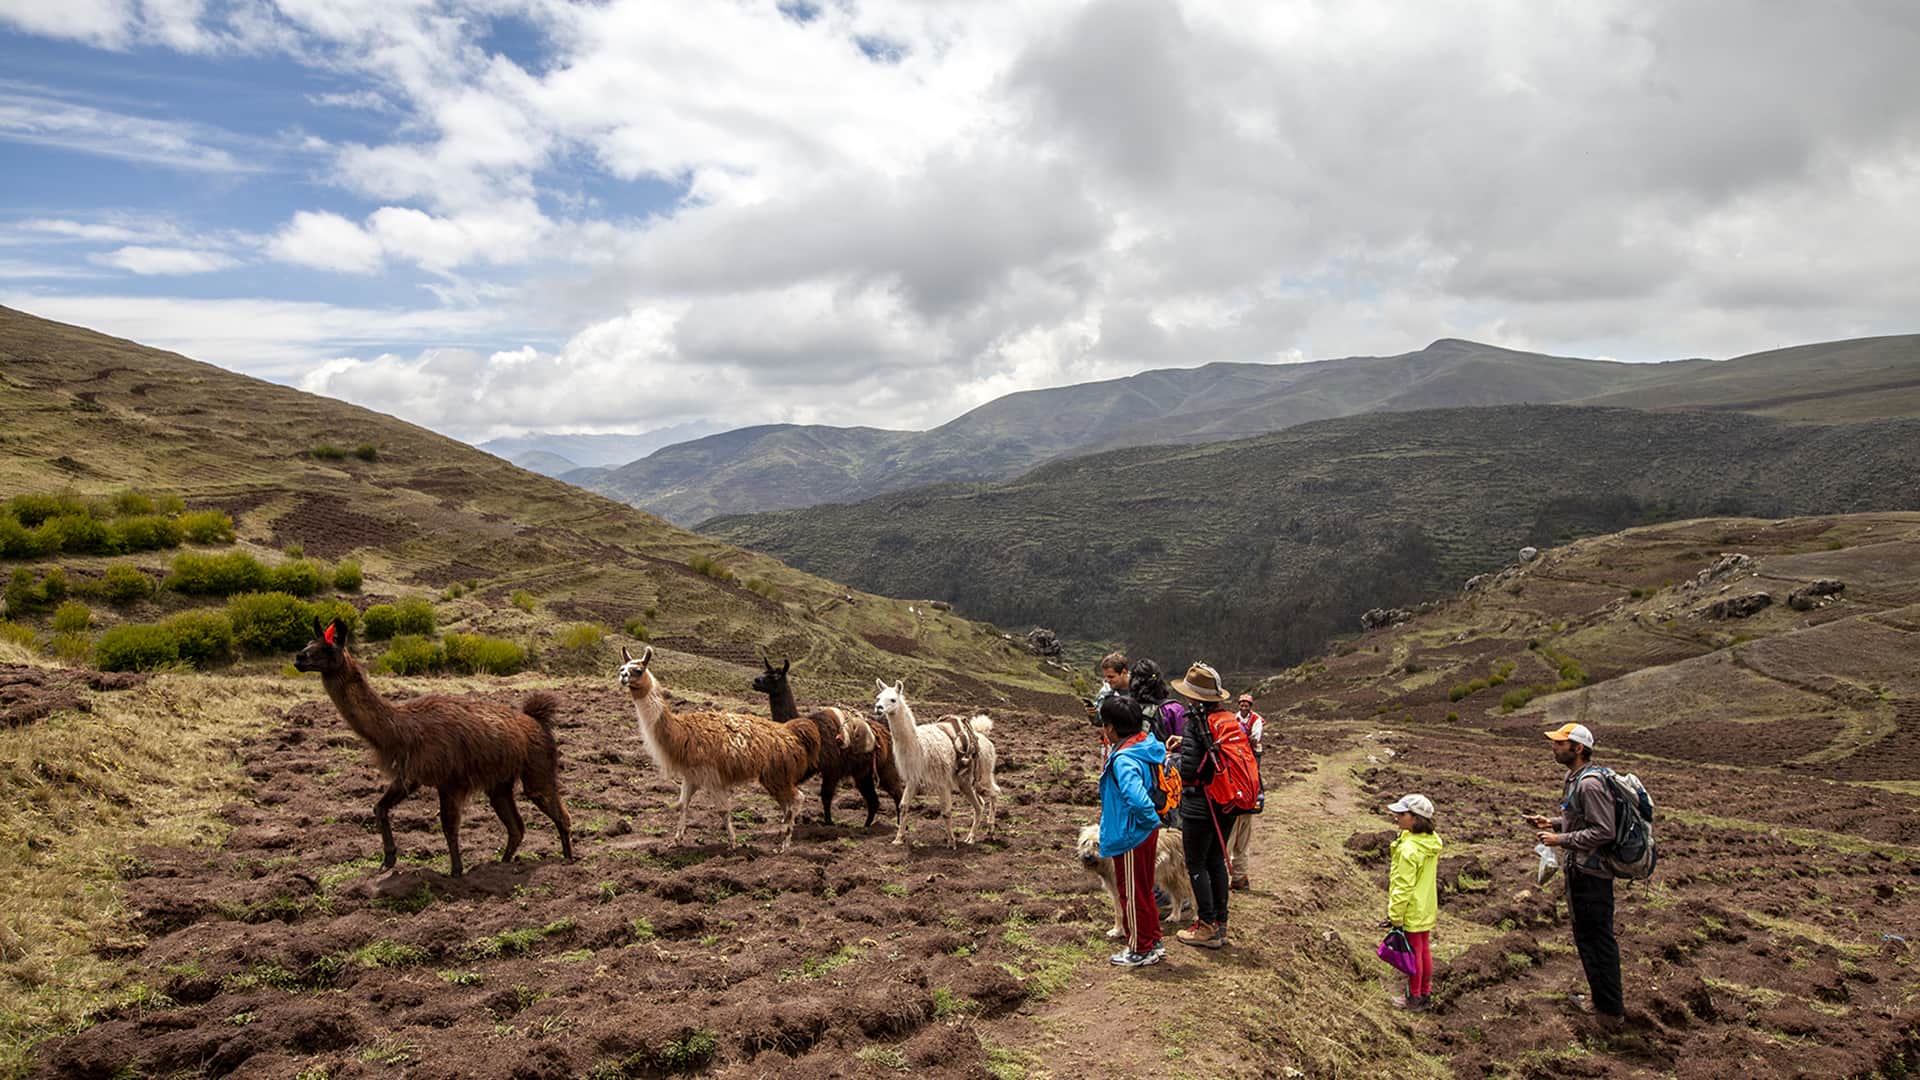 Llamas and hikers among cropfields in the Sacred Valley of Cusco